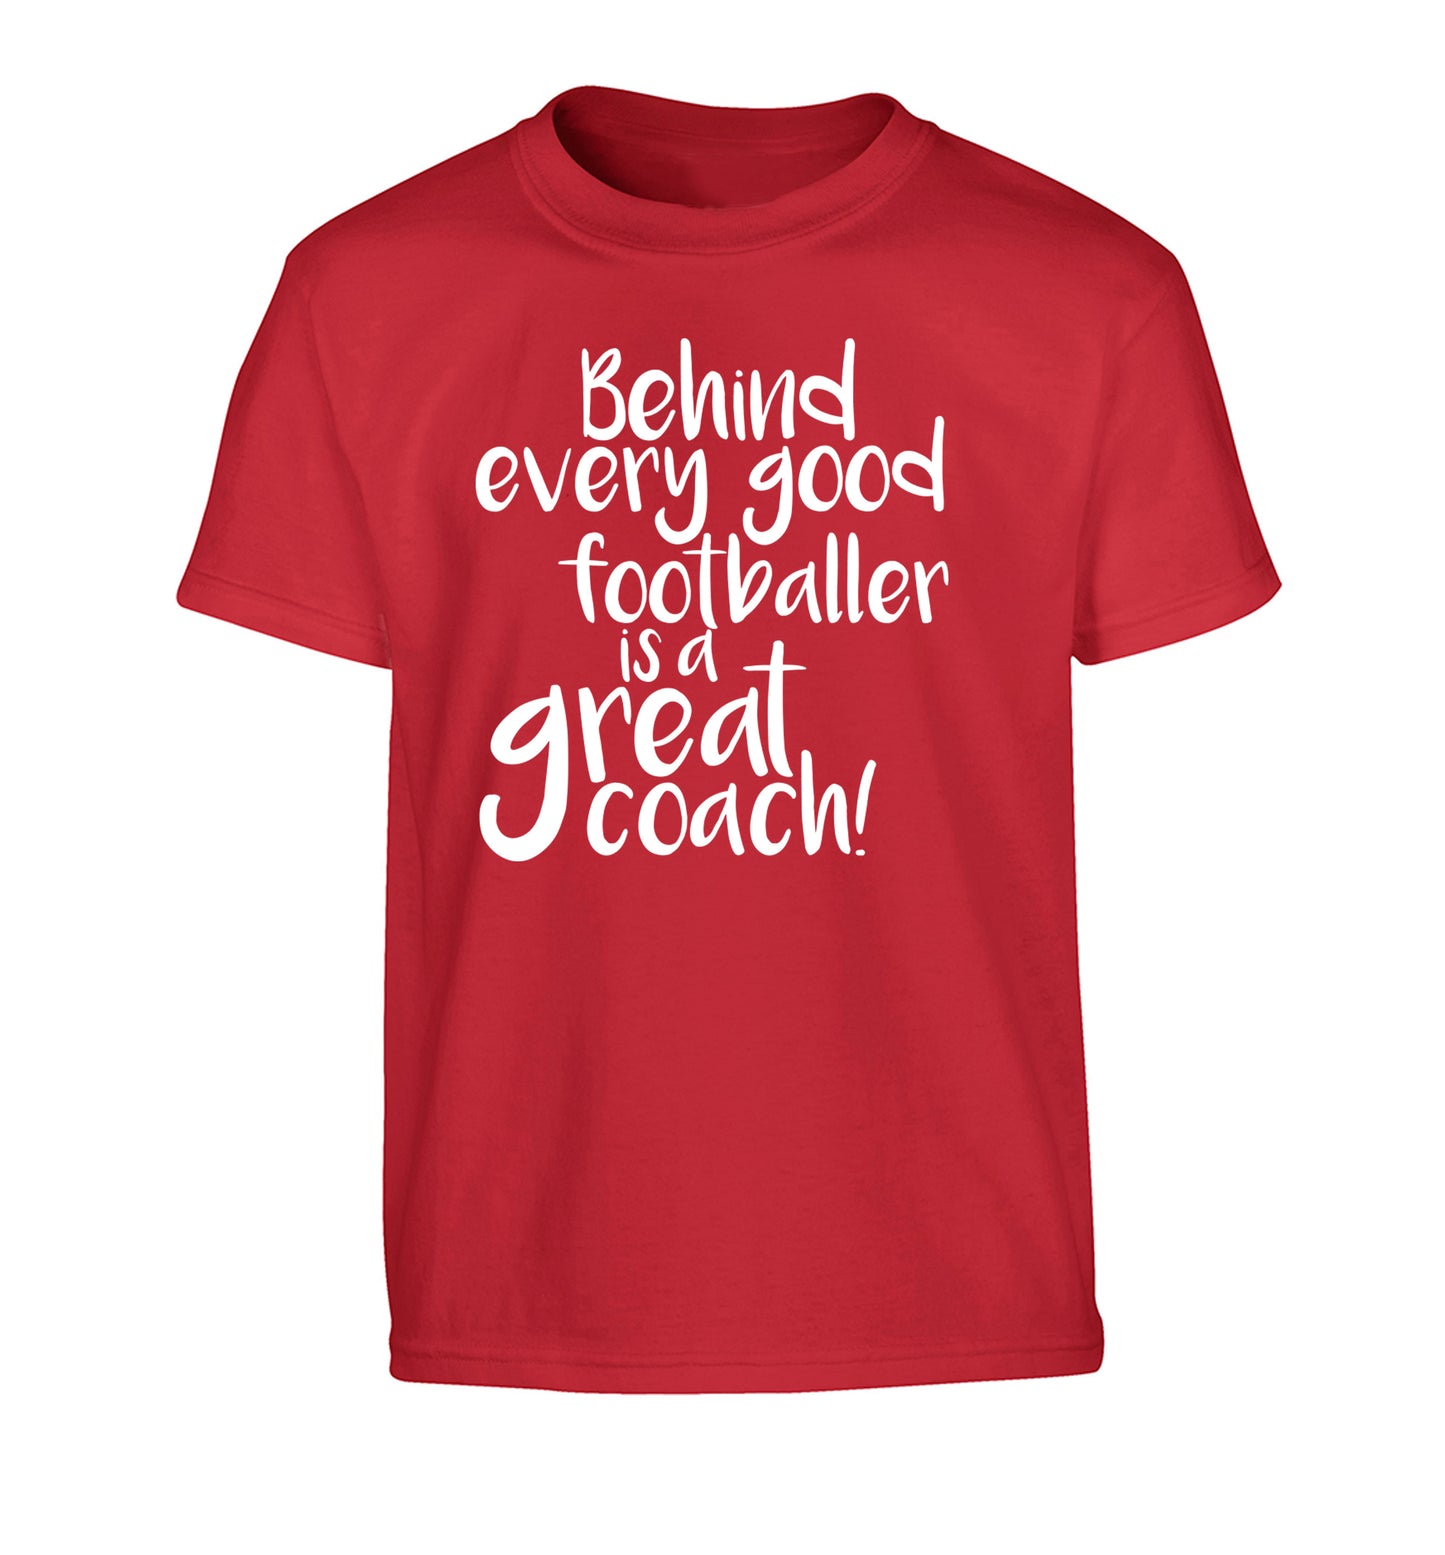 Behind every good footballer is a great coach! Children's red Tshirt 12-14 Years